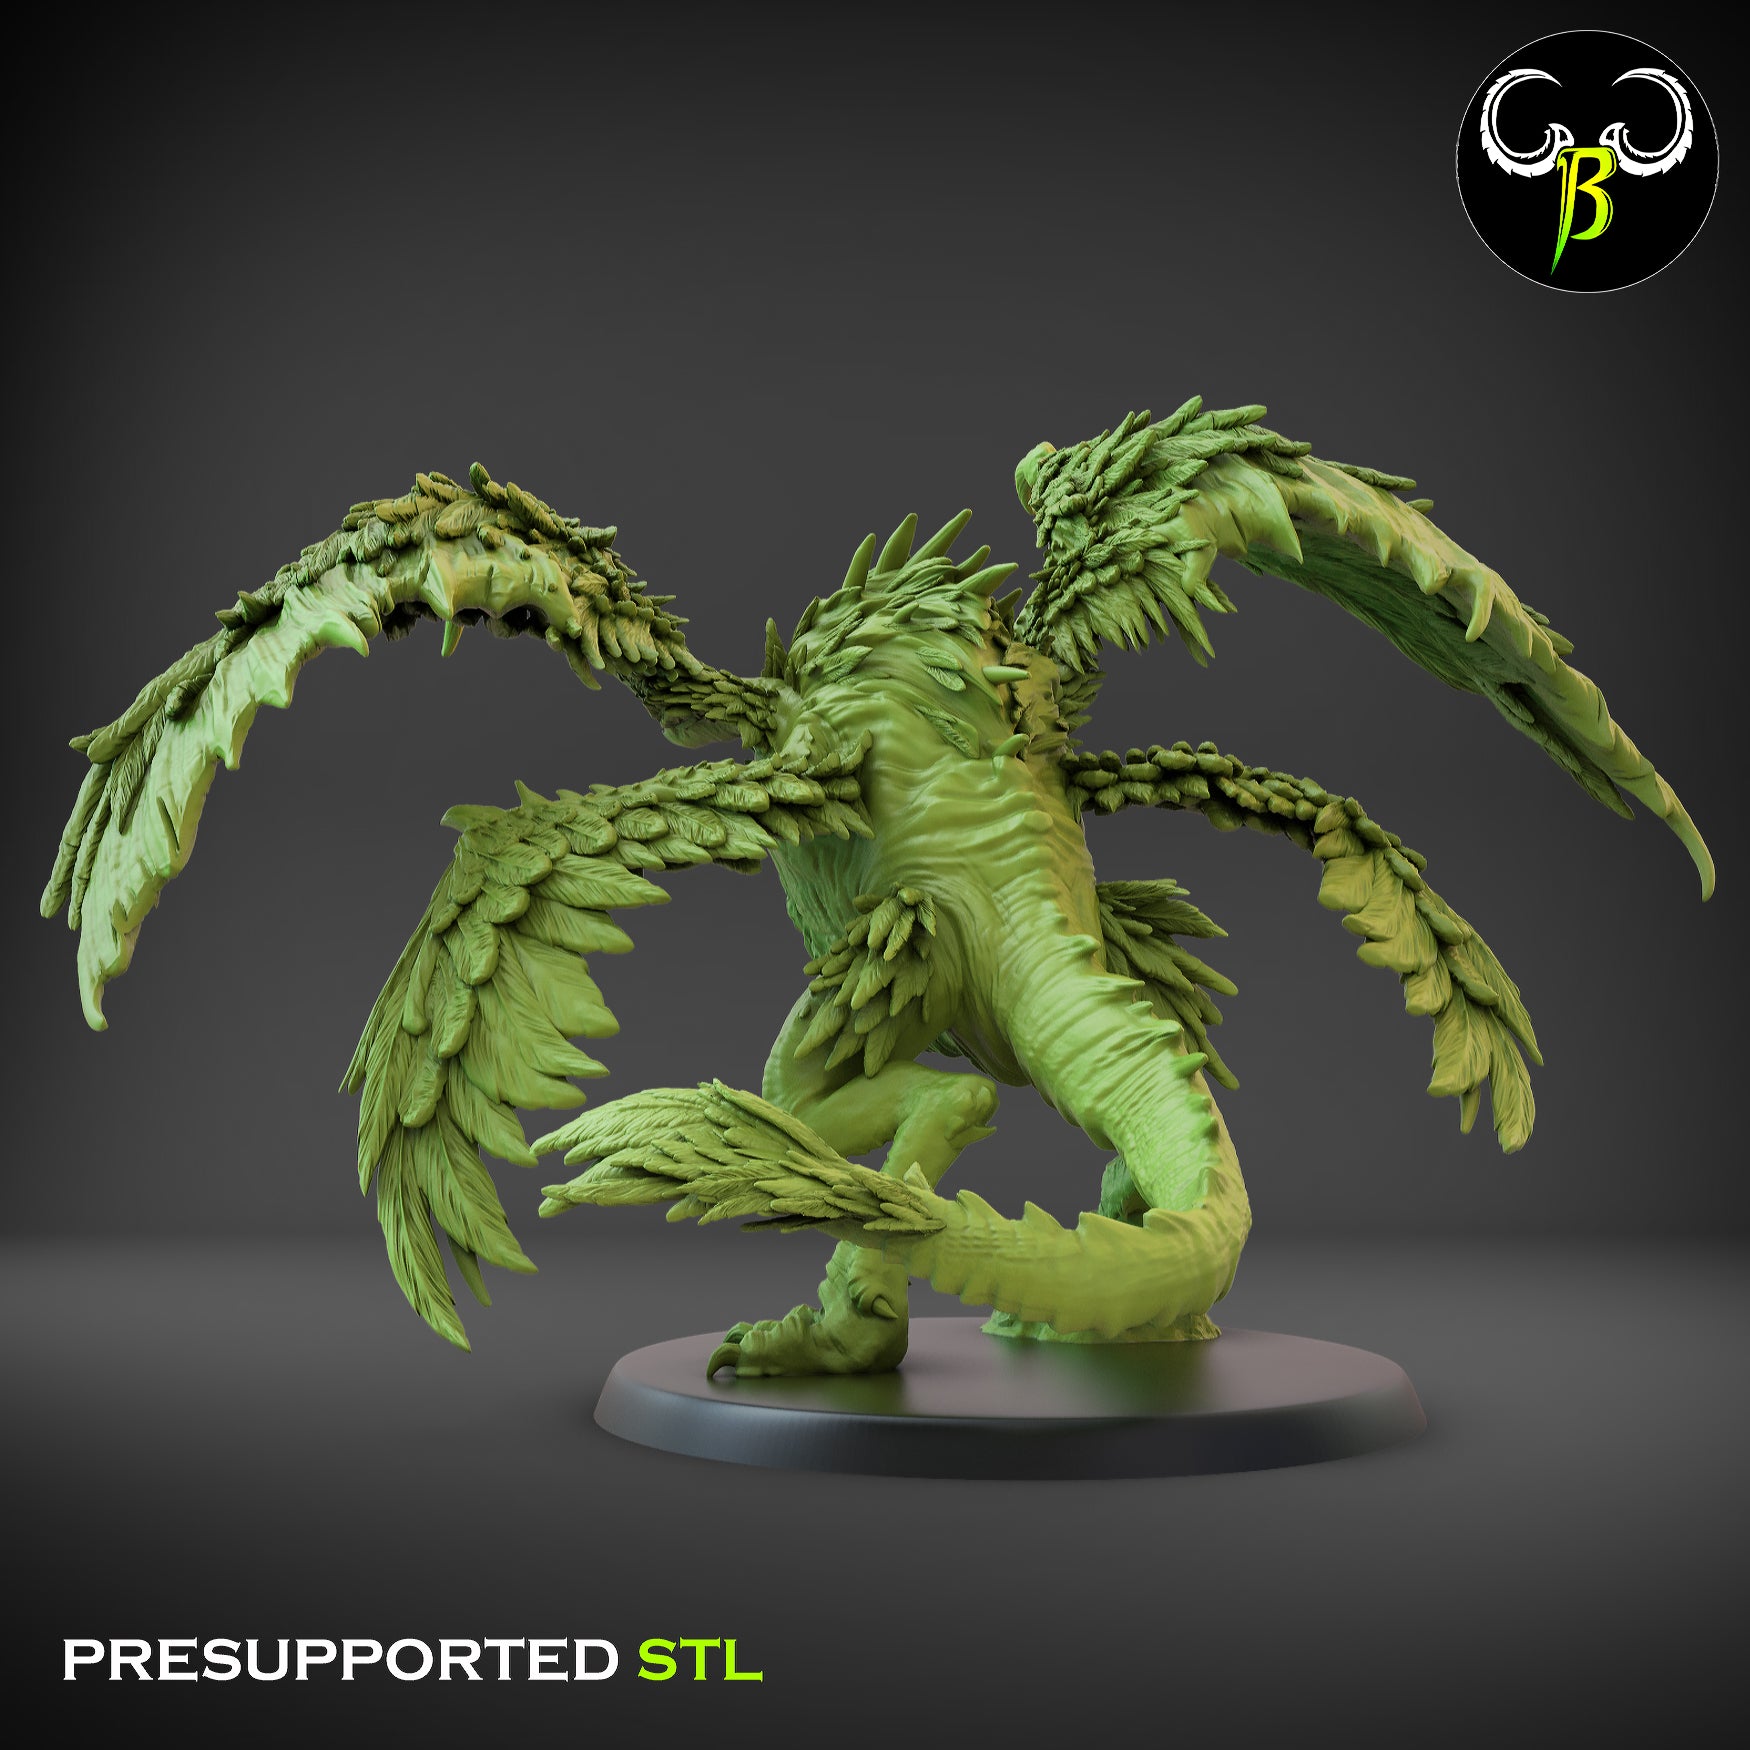 A digital 3D model of a mythical creature with large, feathered wings and a muscular, scaled body stands on a circular base. Perfect for Dungeons and Dragons, this green 3d printed miniature features intricate detailing. Text in the image reads "PRESUPPORTED STL," with a stylized logo featuring a 'B' in the top right. Introducing the Chaos Catrice - Clay Beast Creations - 3d Print.